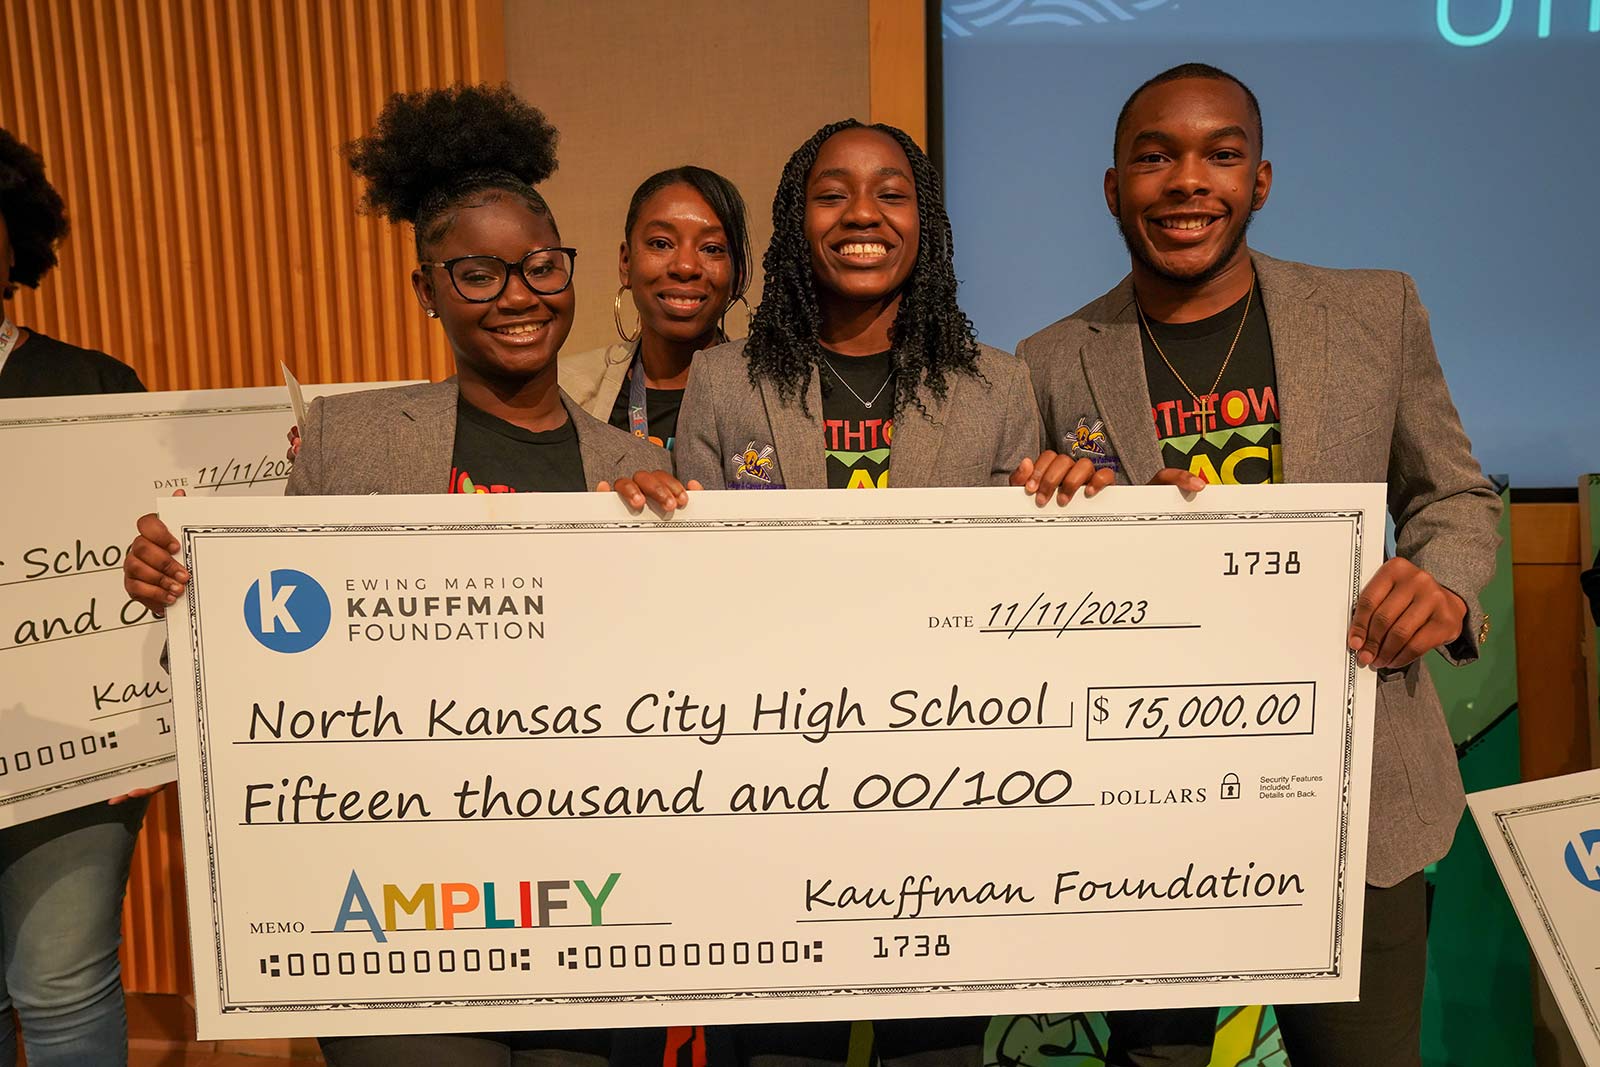 Amplify KC attendees hold a life-sized check made out to North Kansas City High School for $15,000 from the Kauffman Foundation